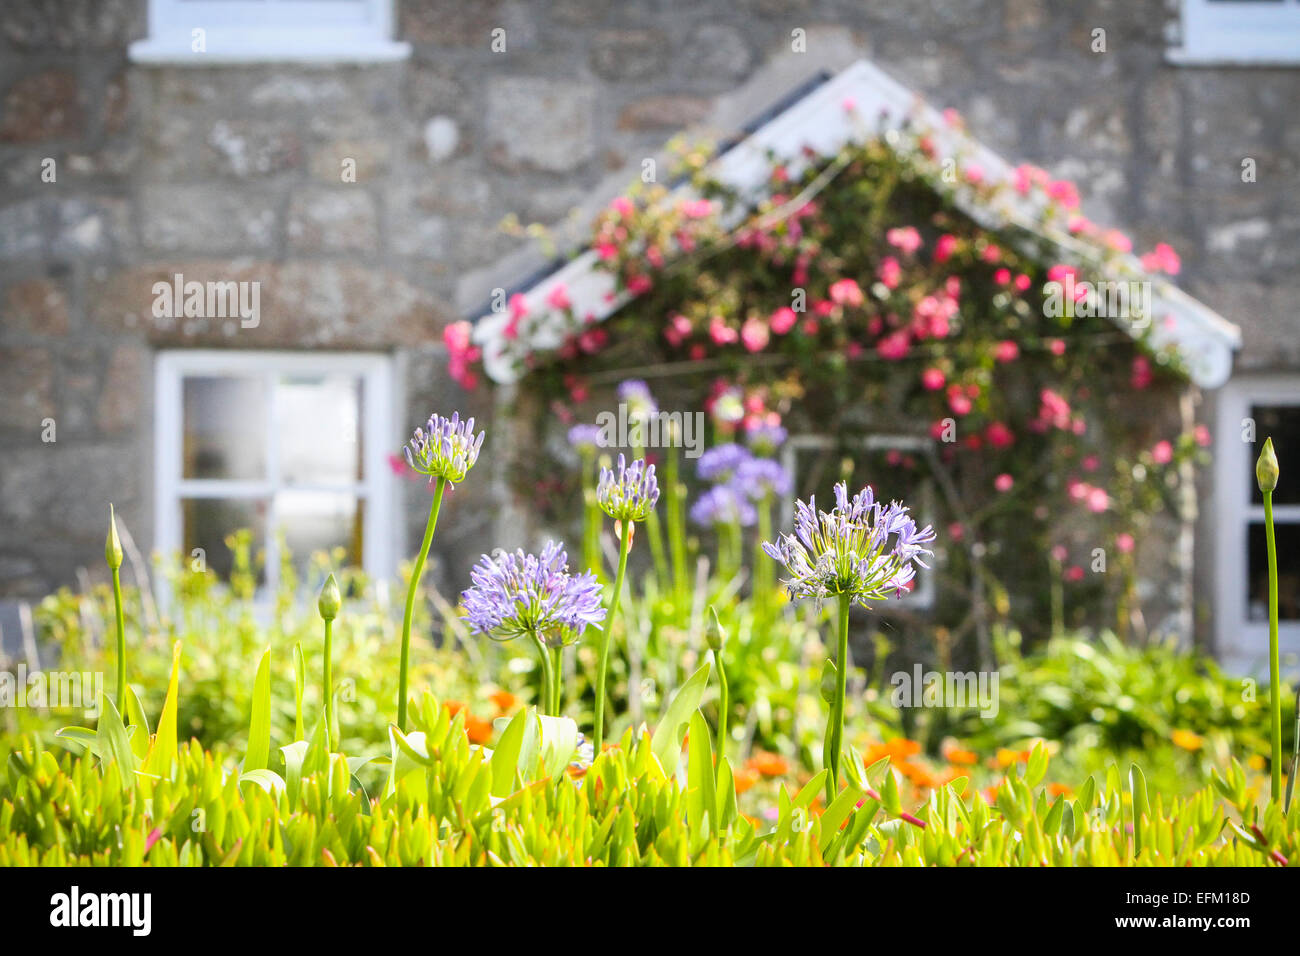 Traditional stone cottage with climbing roses and purple flowers in garden, Isles of Scilly, UK Stock Photo